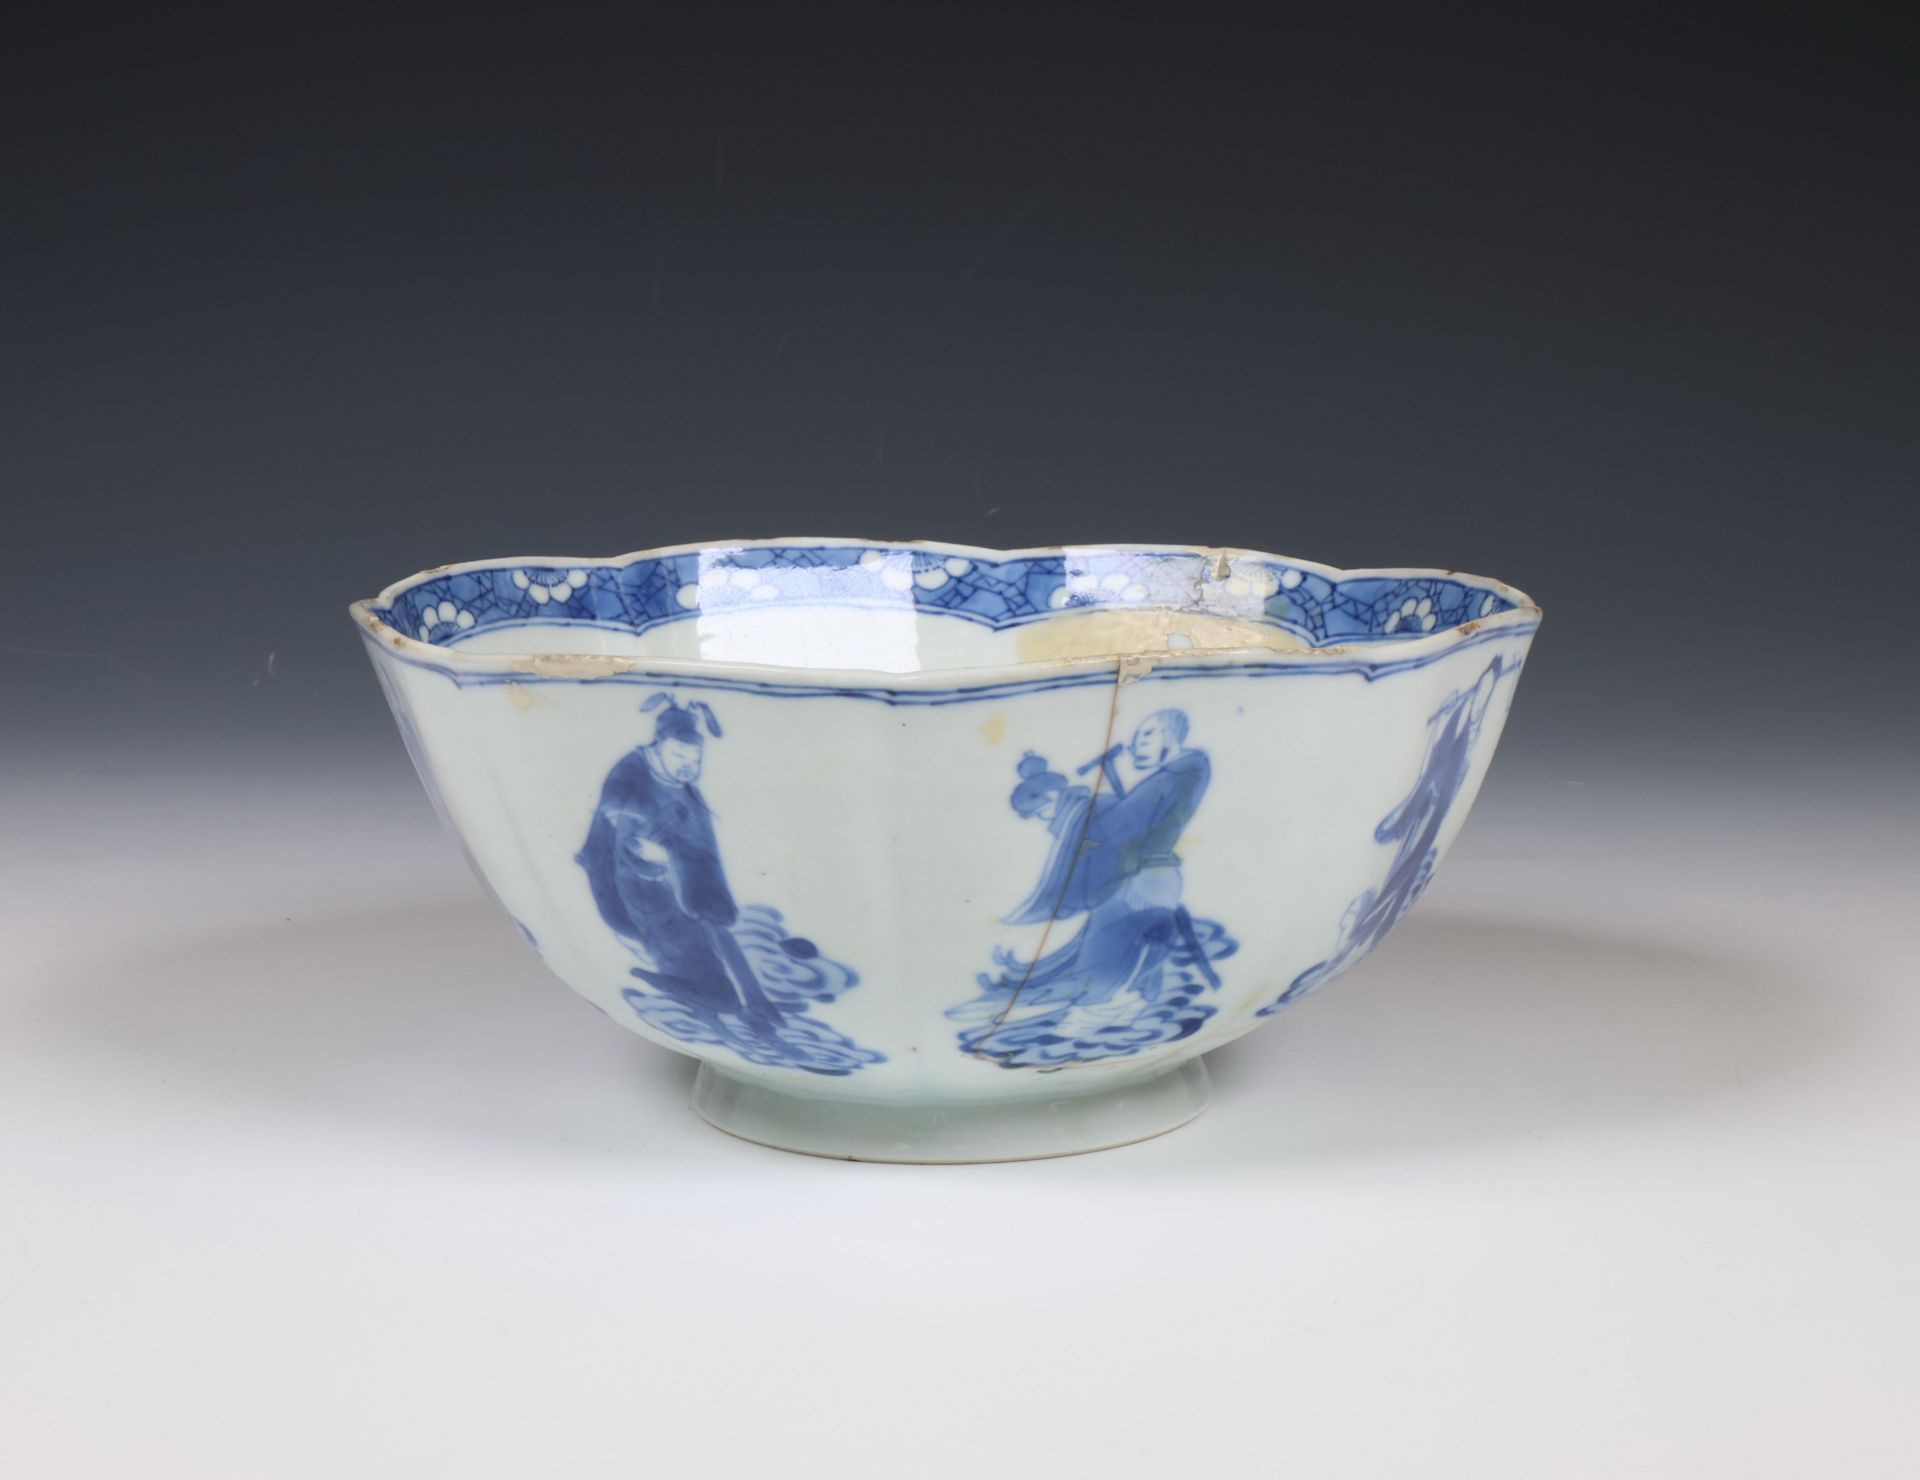 China, blue and white porcelain 'Immortals' bowl, Kangxi period (1662-1722),